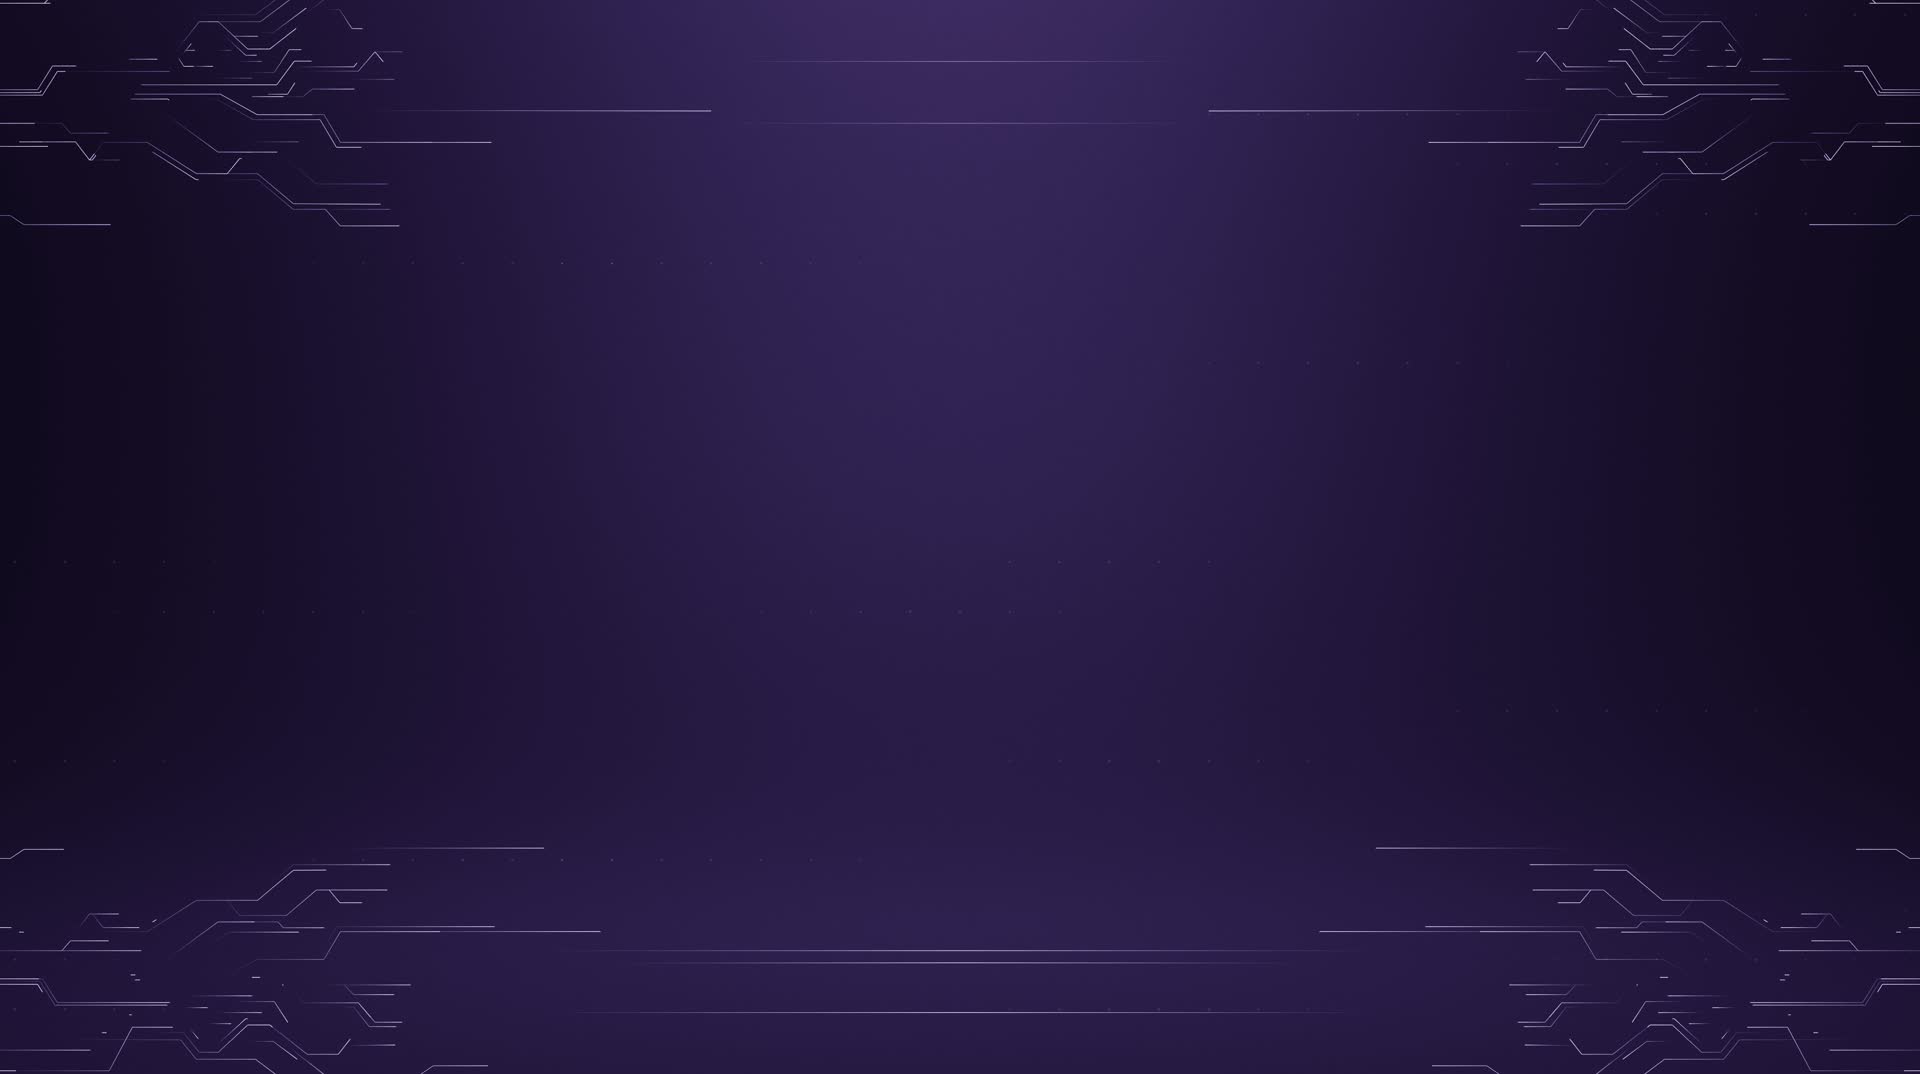 Looping Tech Background Clean Purple 2 Effect. FootageCrate FX Archives